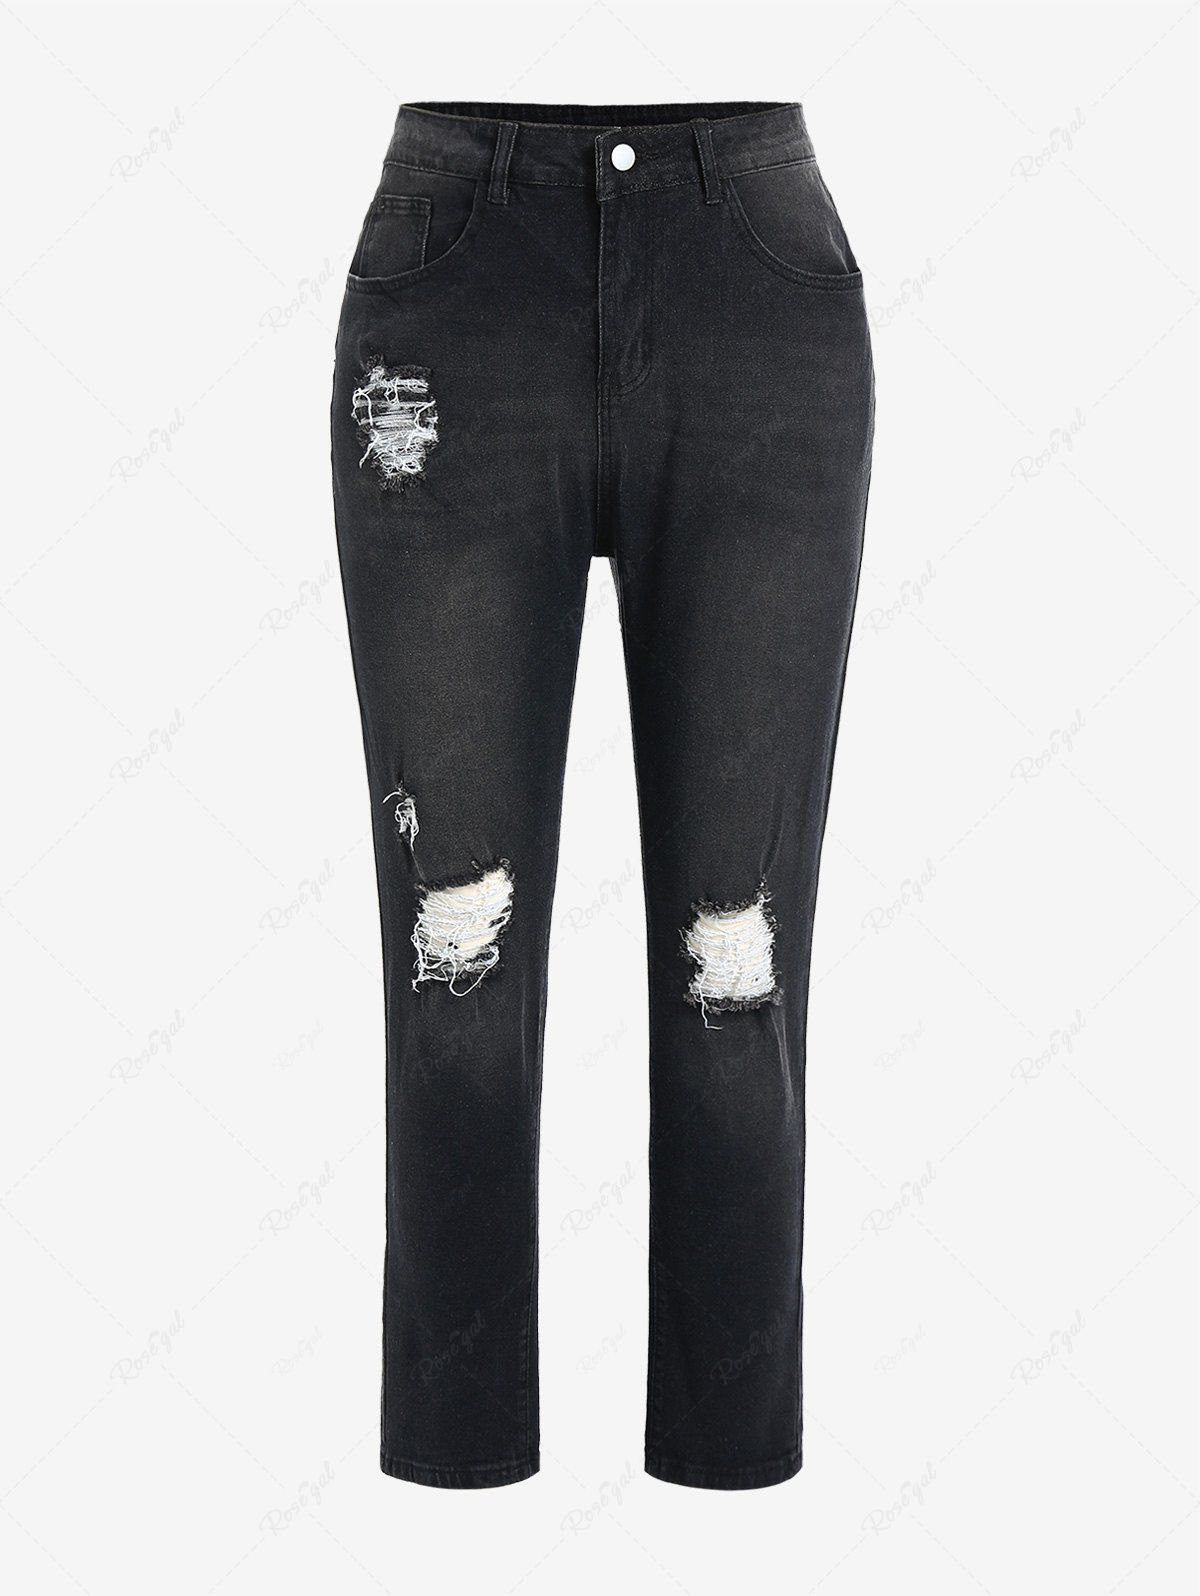 Cheap Plus Size Cat's Whisker Ripped Pencil Jeans  